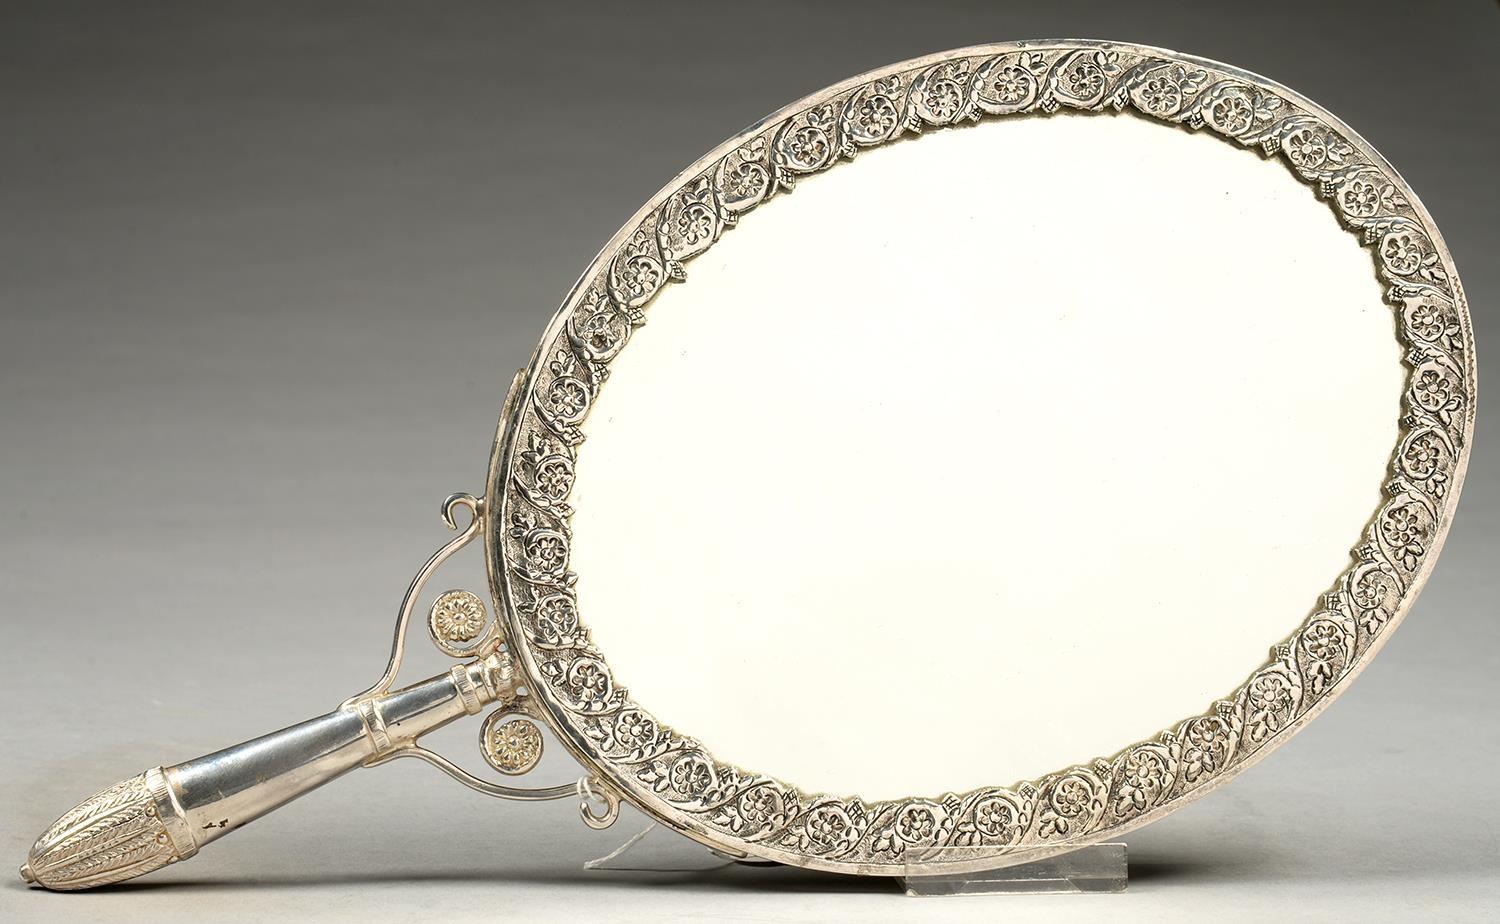 AN OTTOMAN SILVER HAND MIRROR, CHASED IN HIGH RELIEF WITH ROSES AND OTHER FLOWERS FRAMED BY - Image 2 of 3